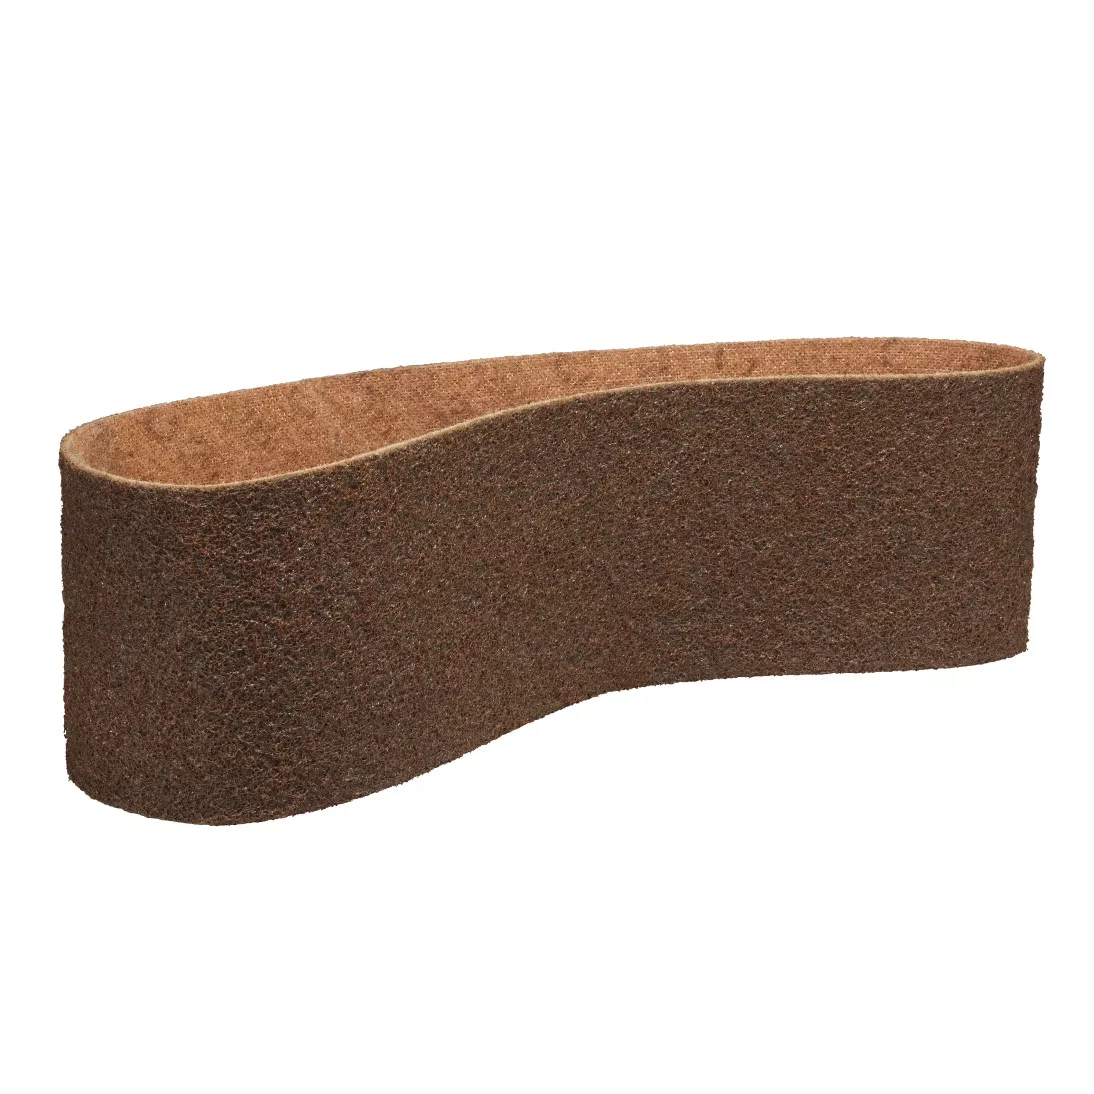 Scotch-Brite™ Surface Conditioning Belt, 6 in x 48 in, A CRS, 5 ea/Case